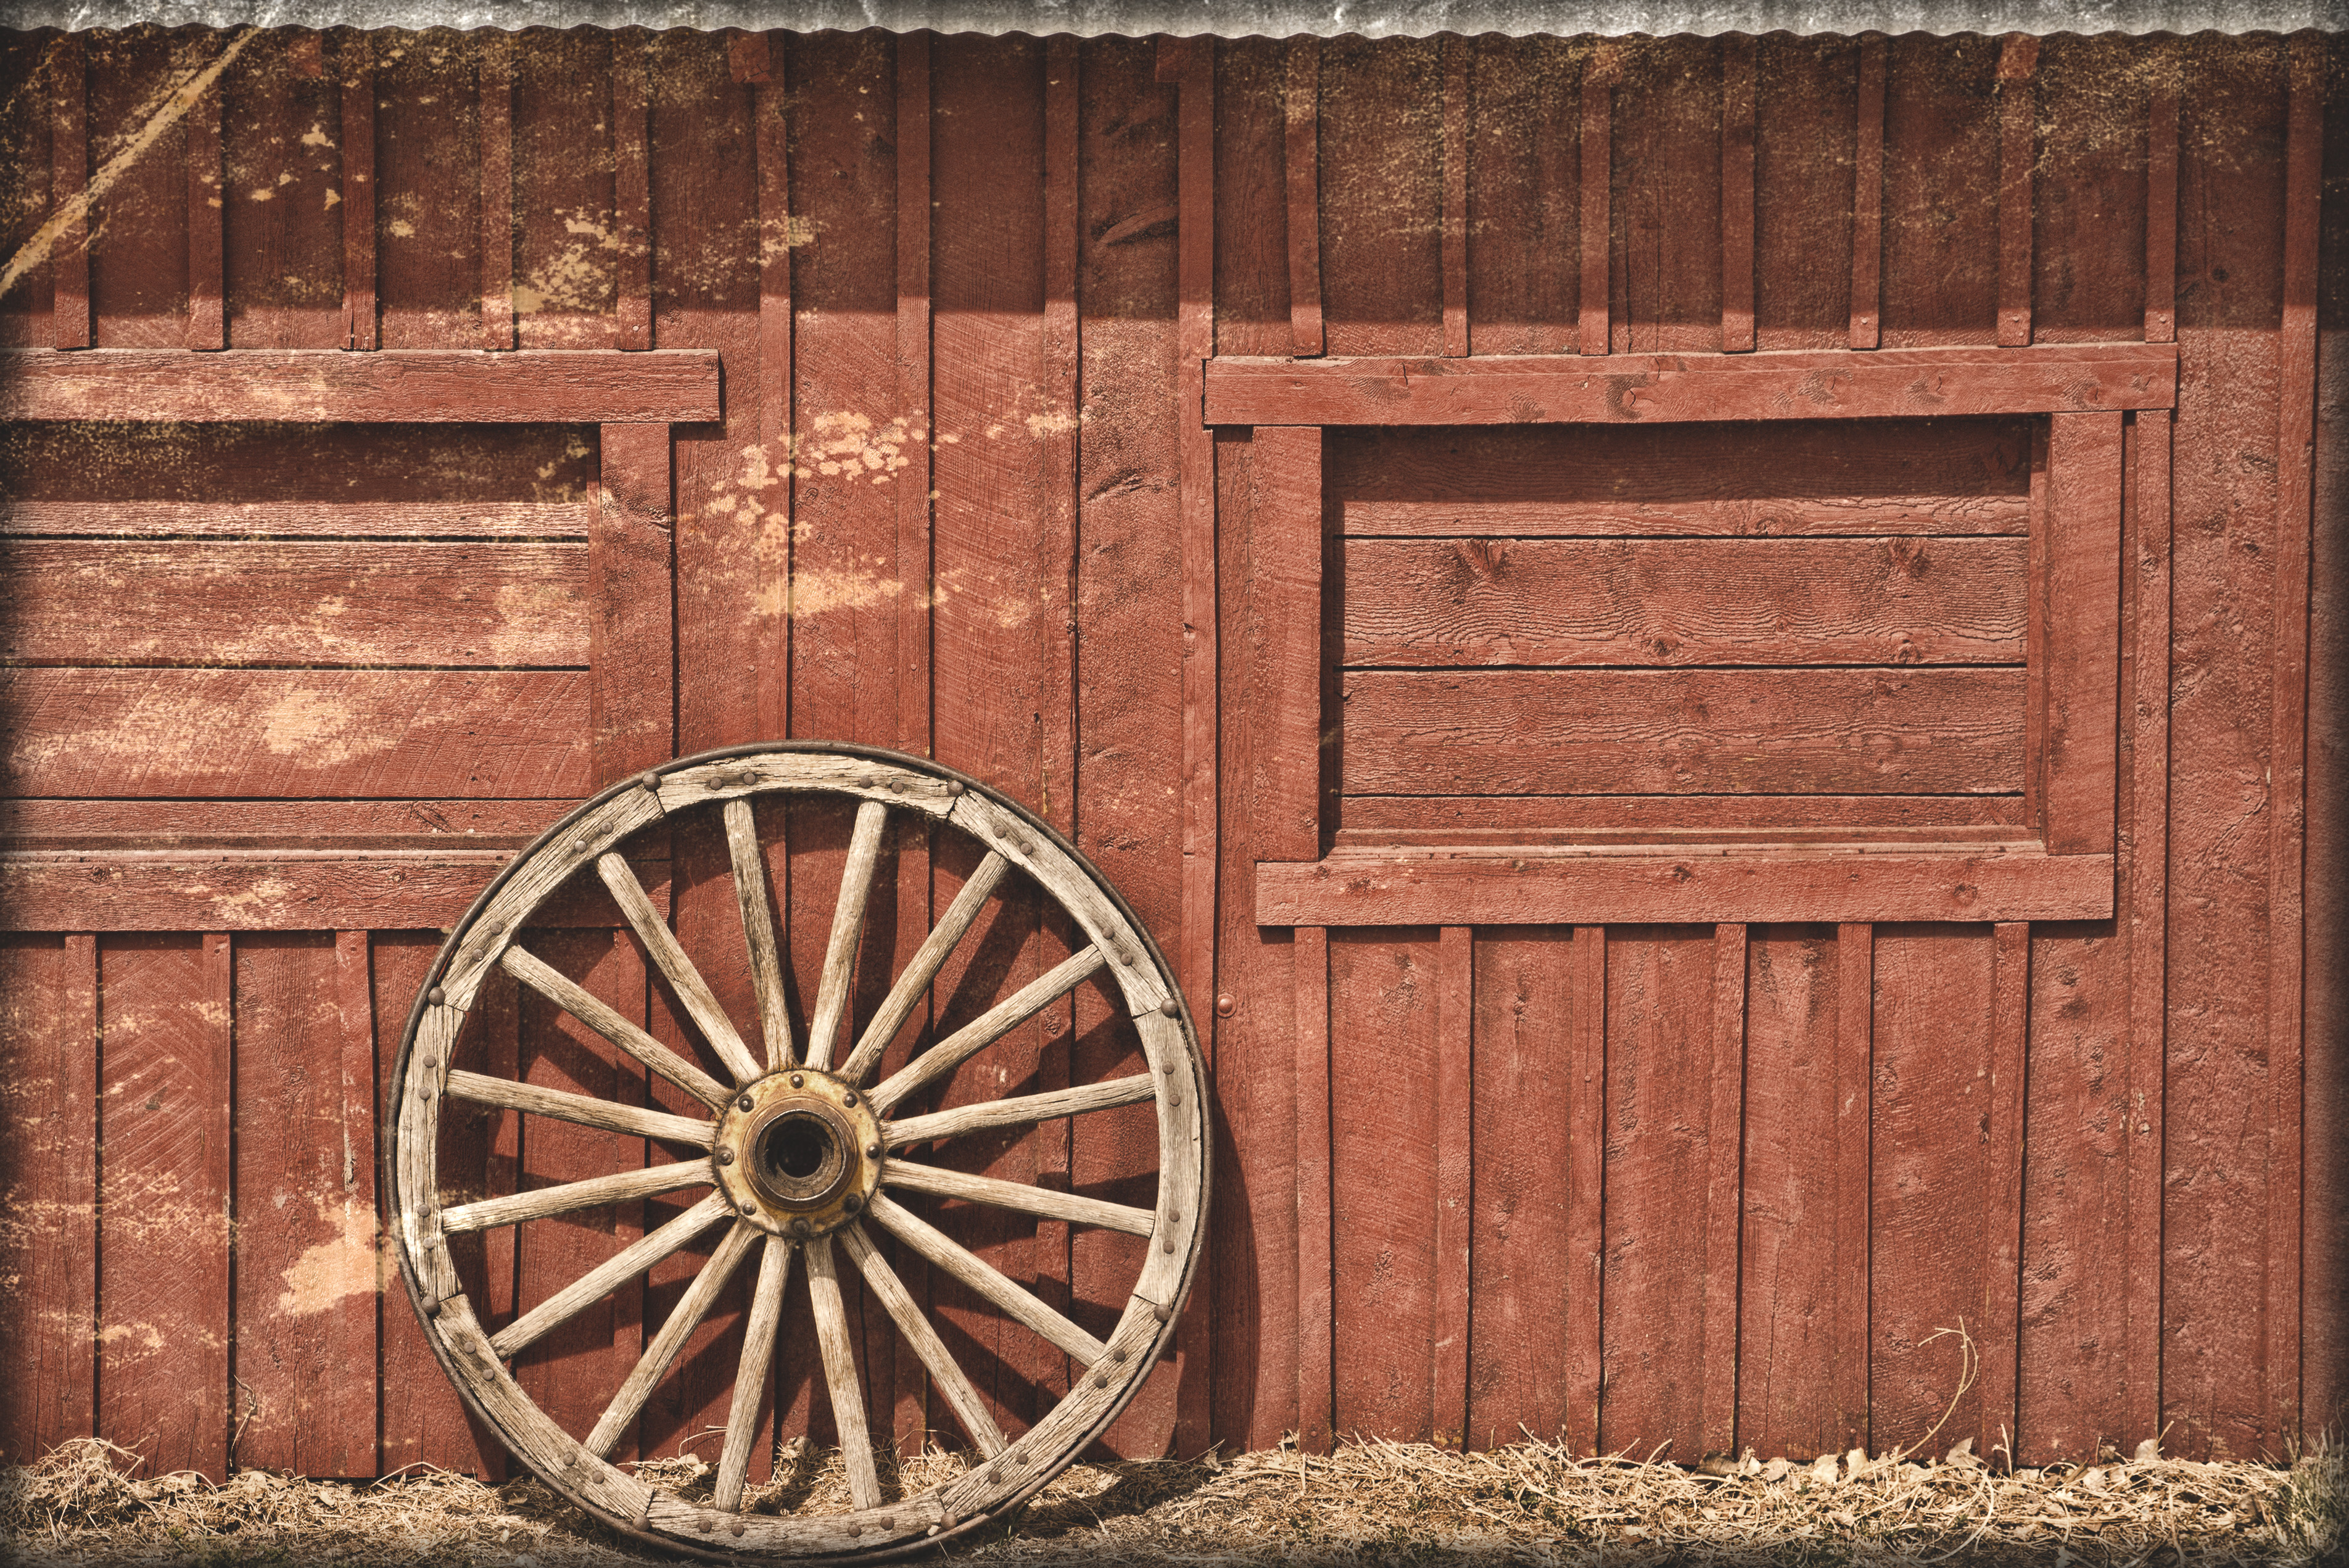 Red Barn And Wooden Wheel By Mudyfrog